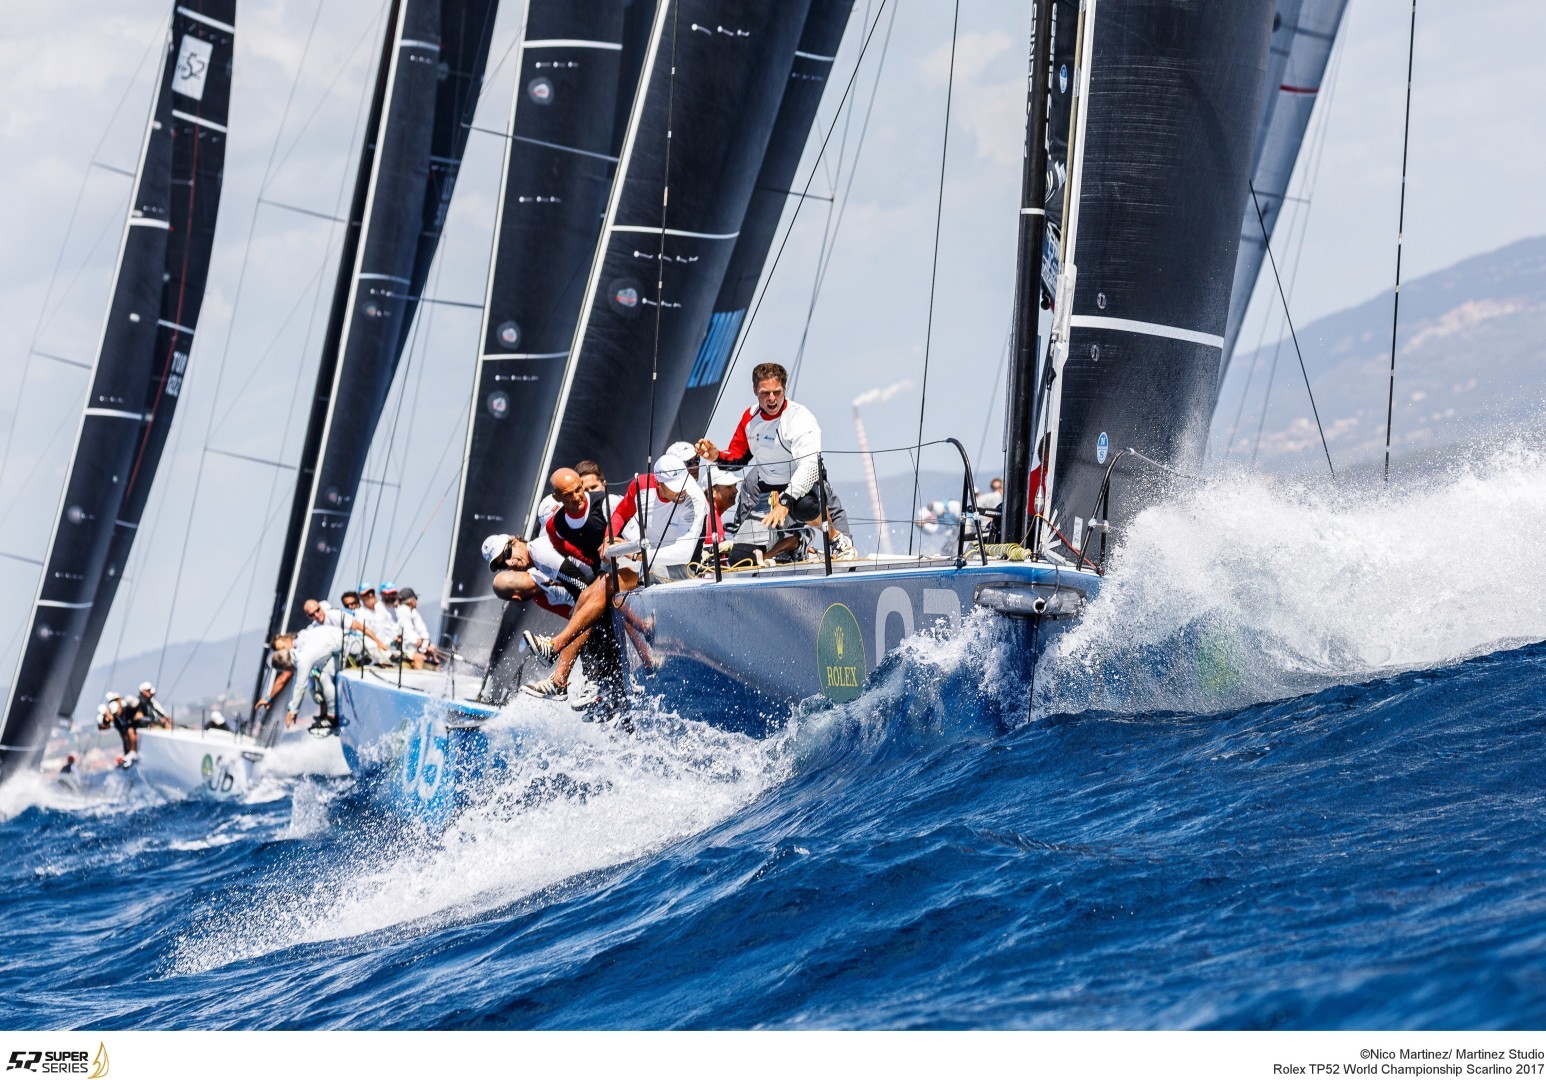 Royal Cup 52 Super Series Scarlino, September 26 to October 01, 2022